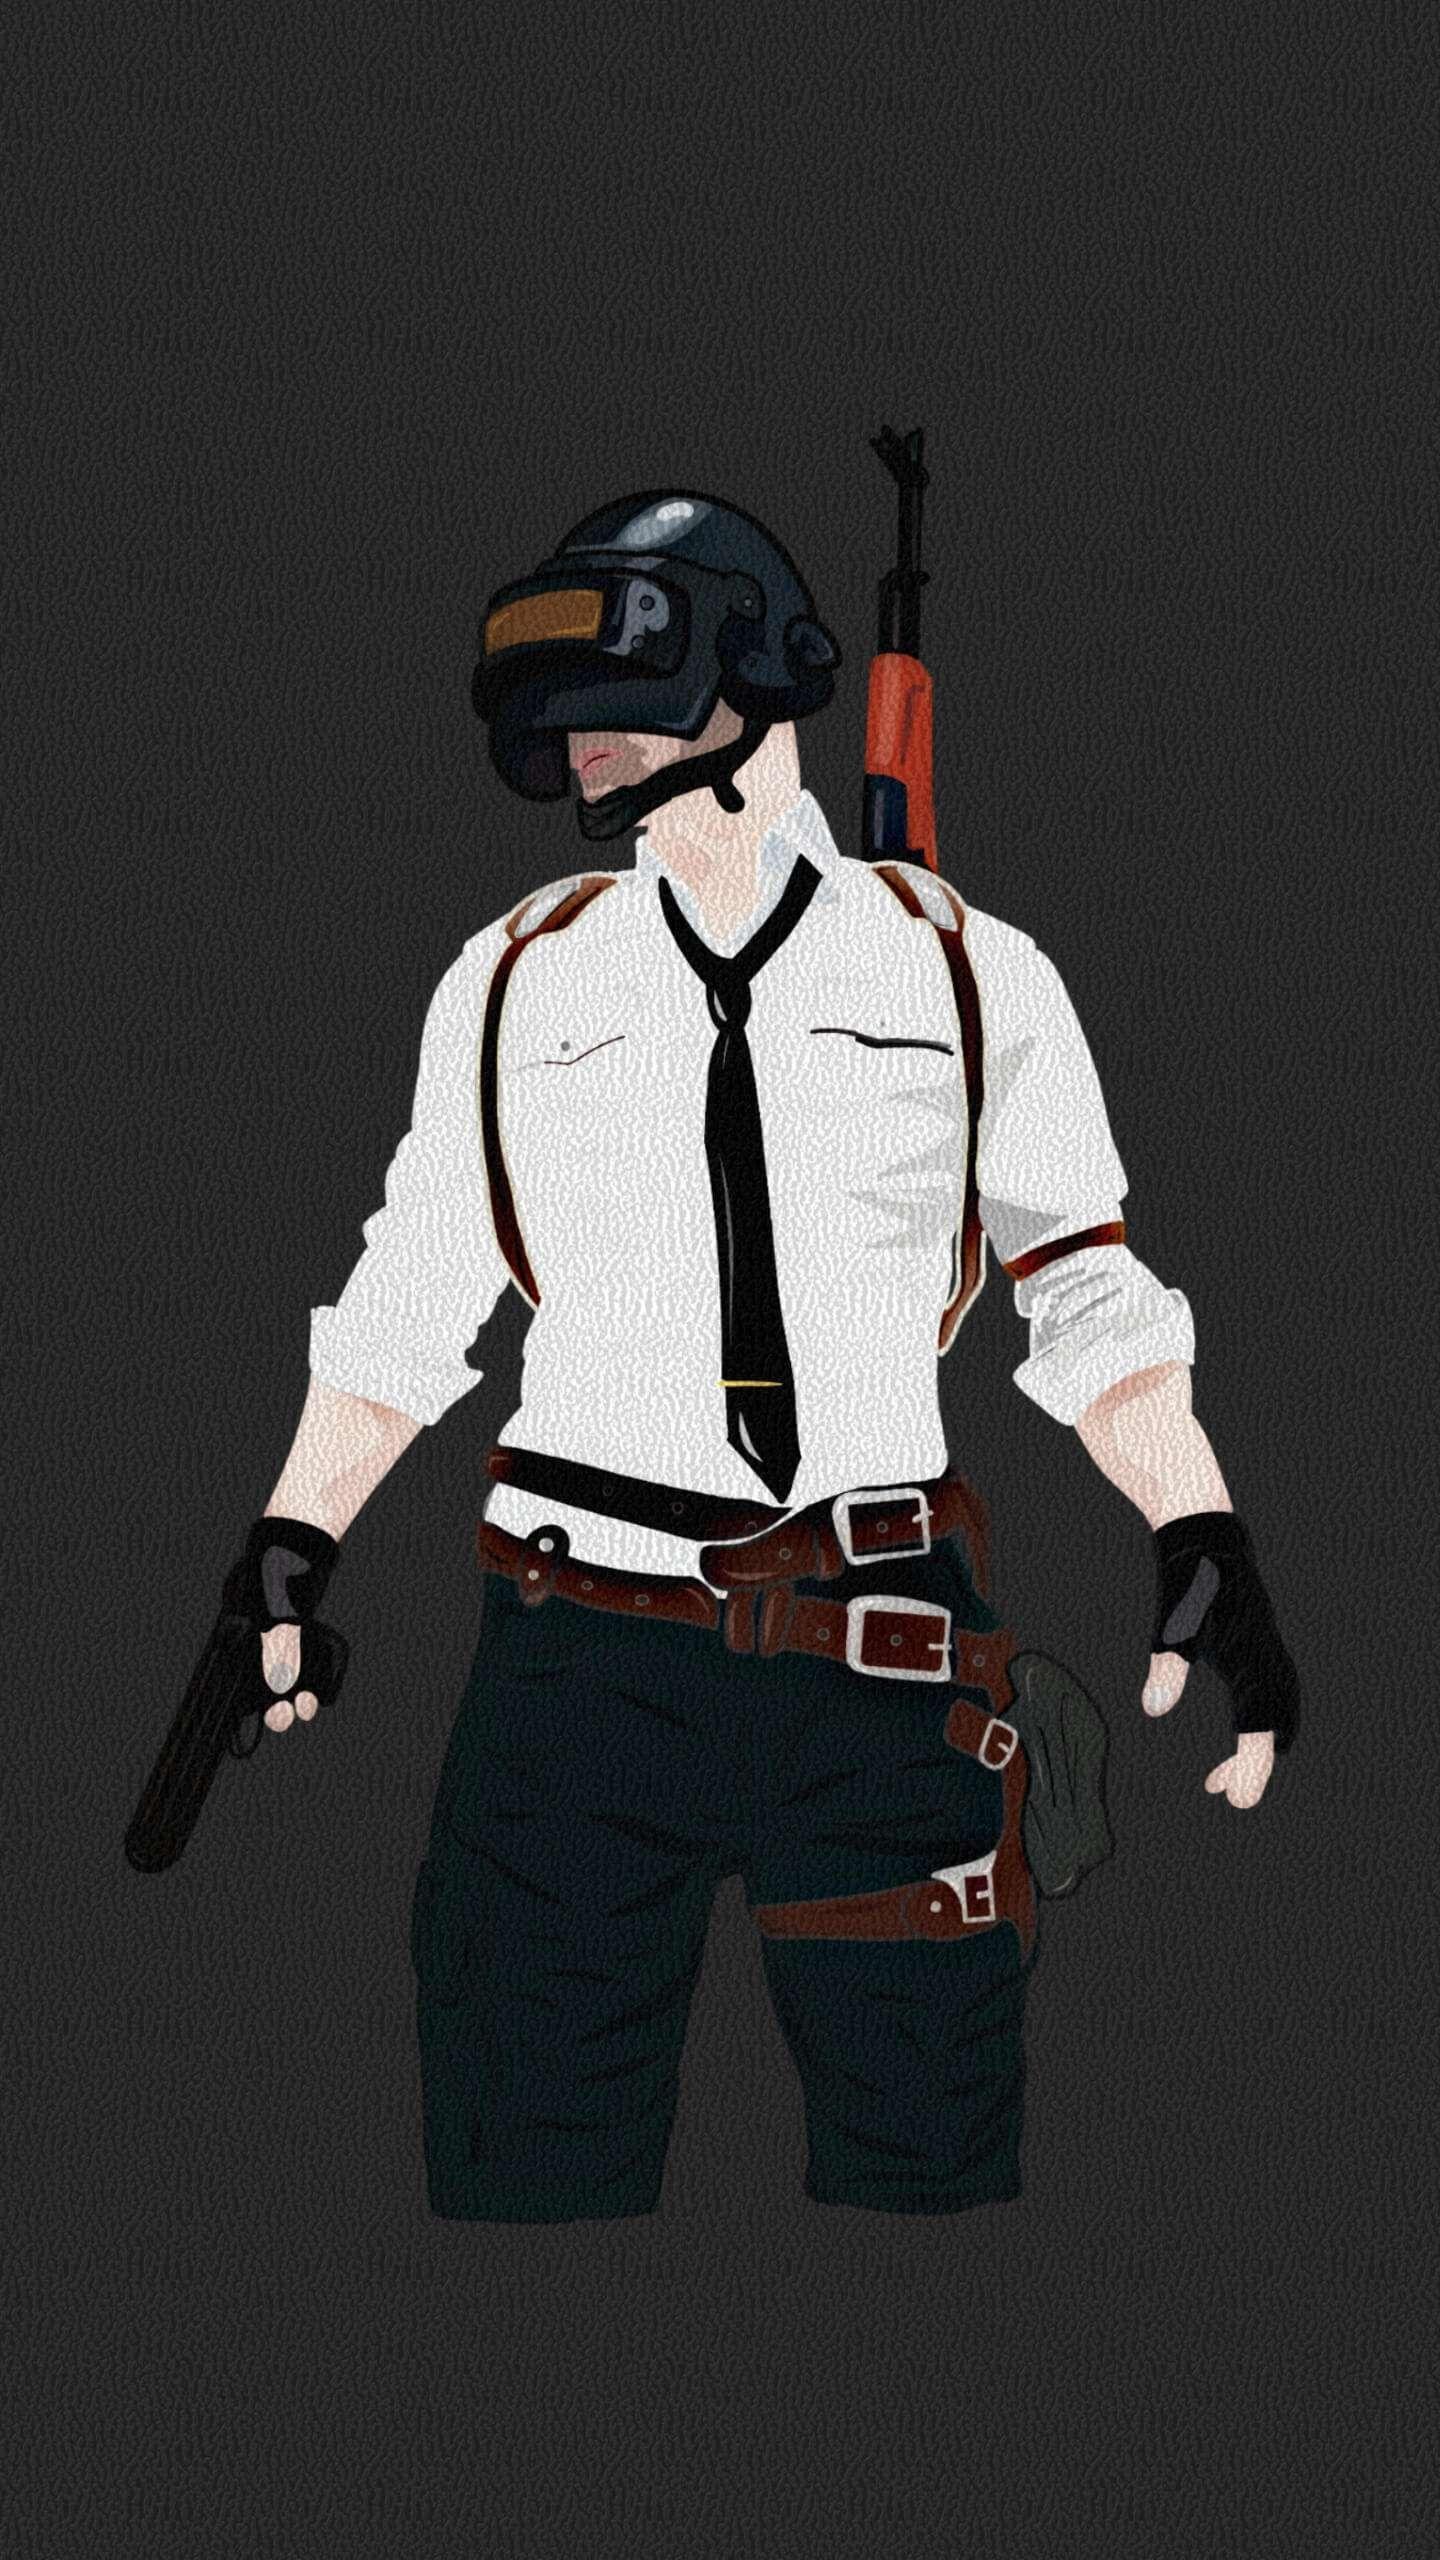 PUBG Level 3 iPhone Wallpaper. Android phone